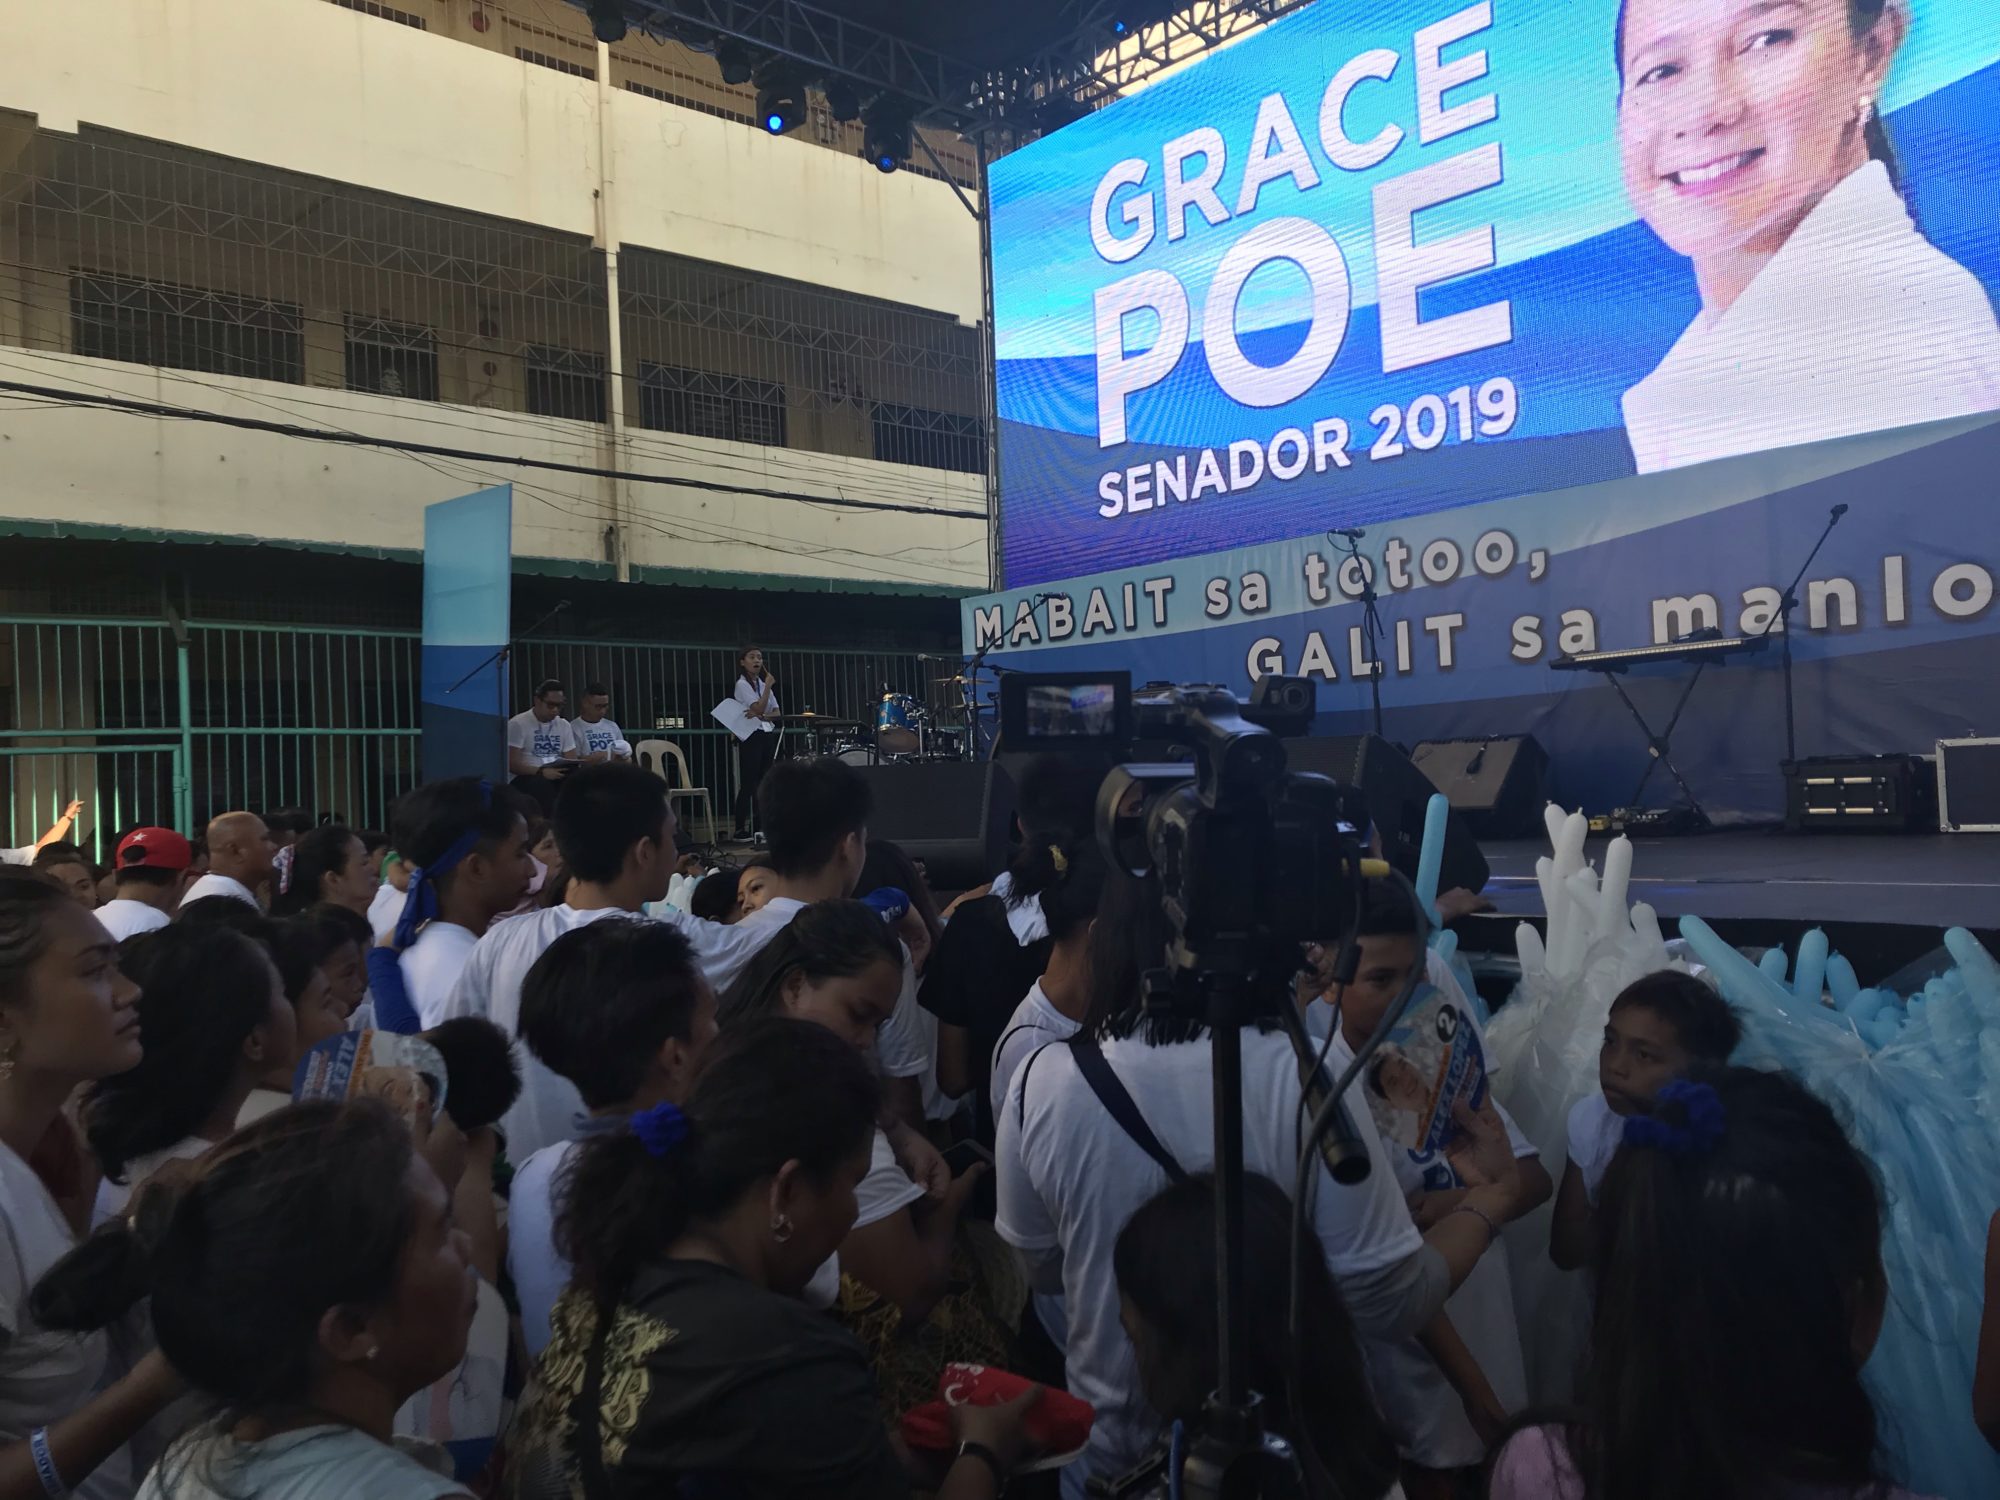 LOOK: Poe capping off campaign in Tondo